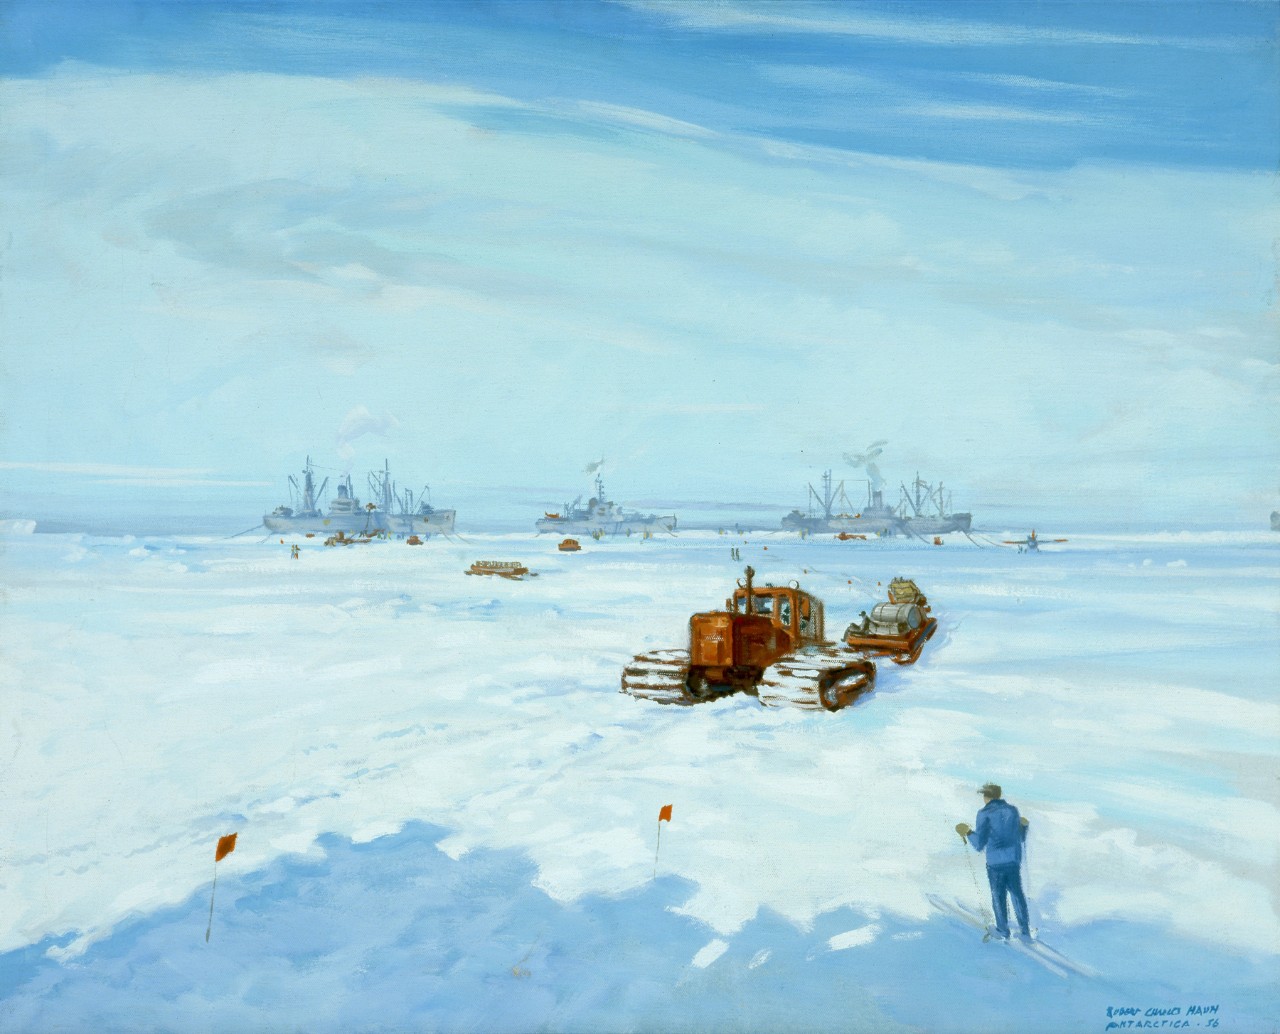 Tractor train hauling supplies from the ships across the ice